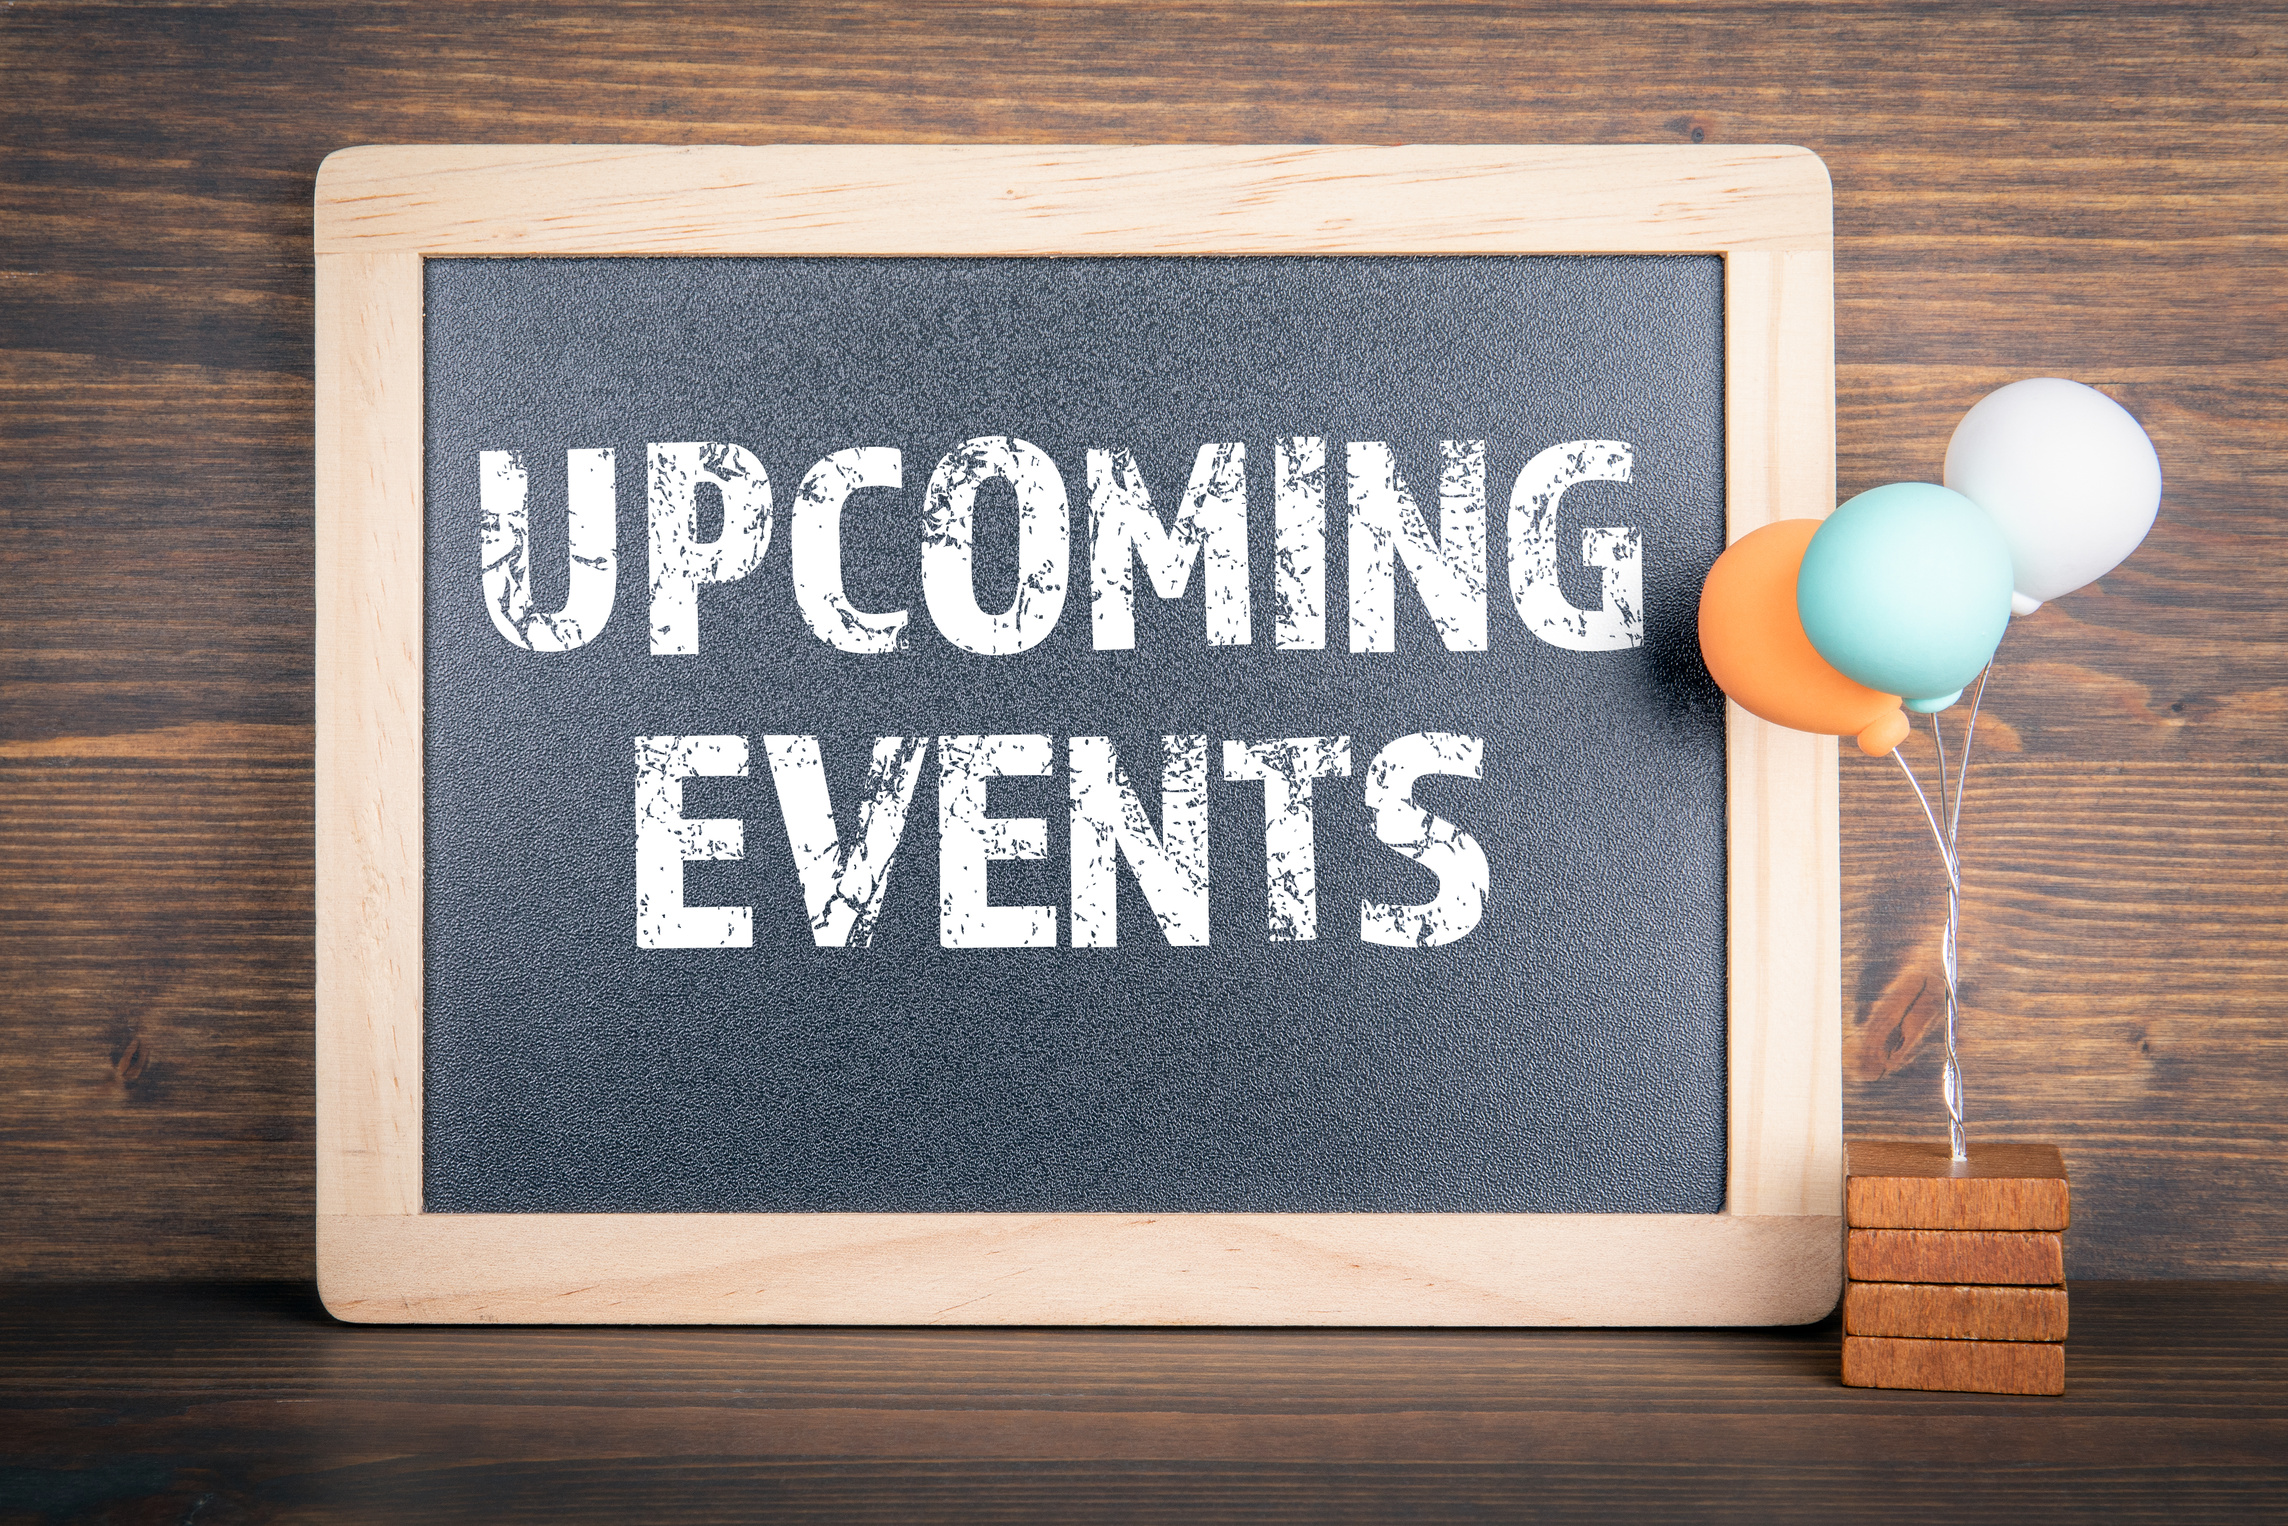 UPCOMING EVENTS. Chalkboard and colored balloons on a wooden background